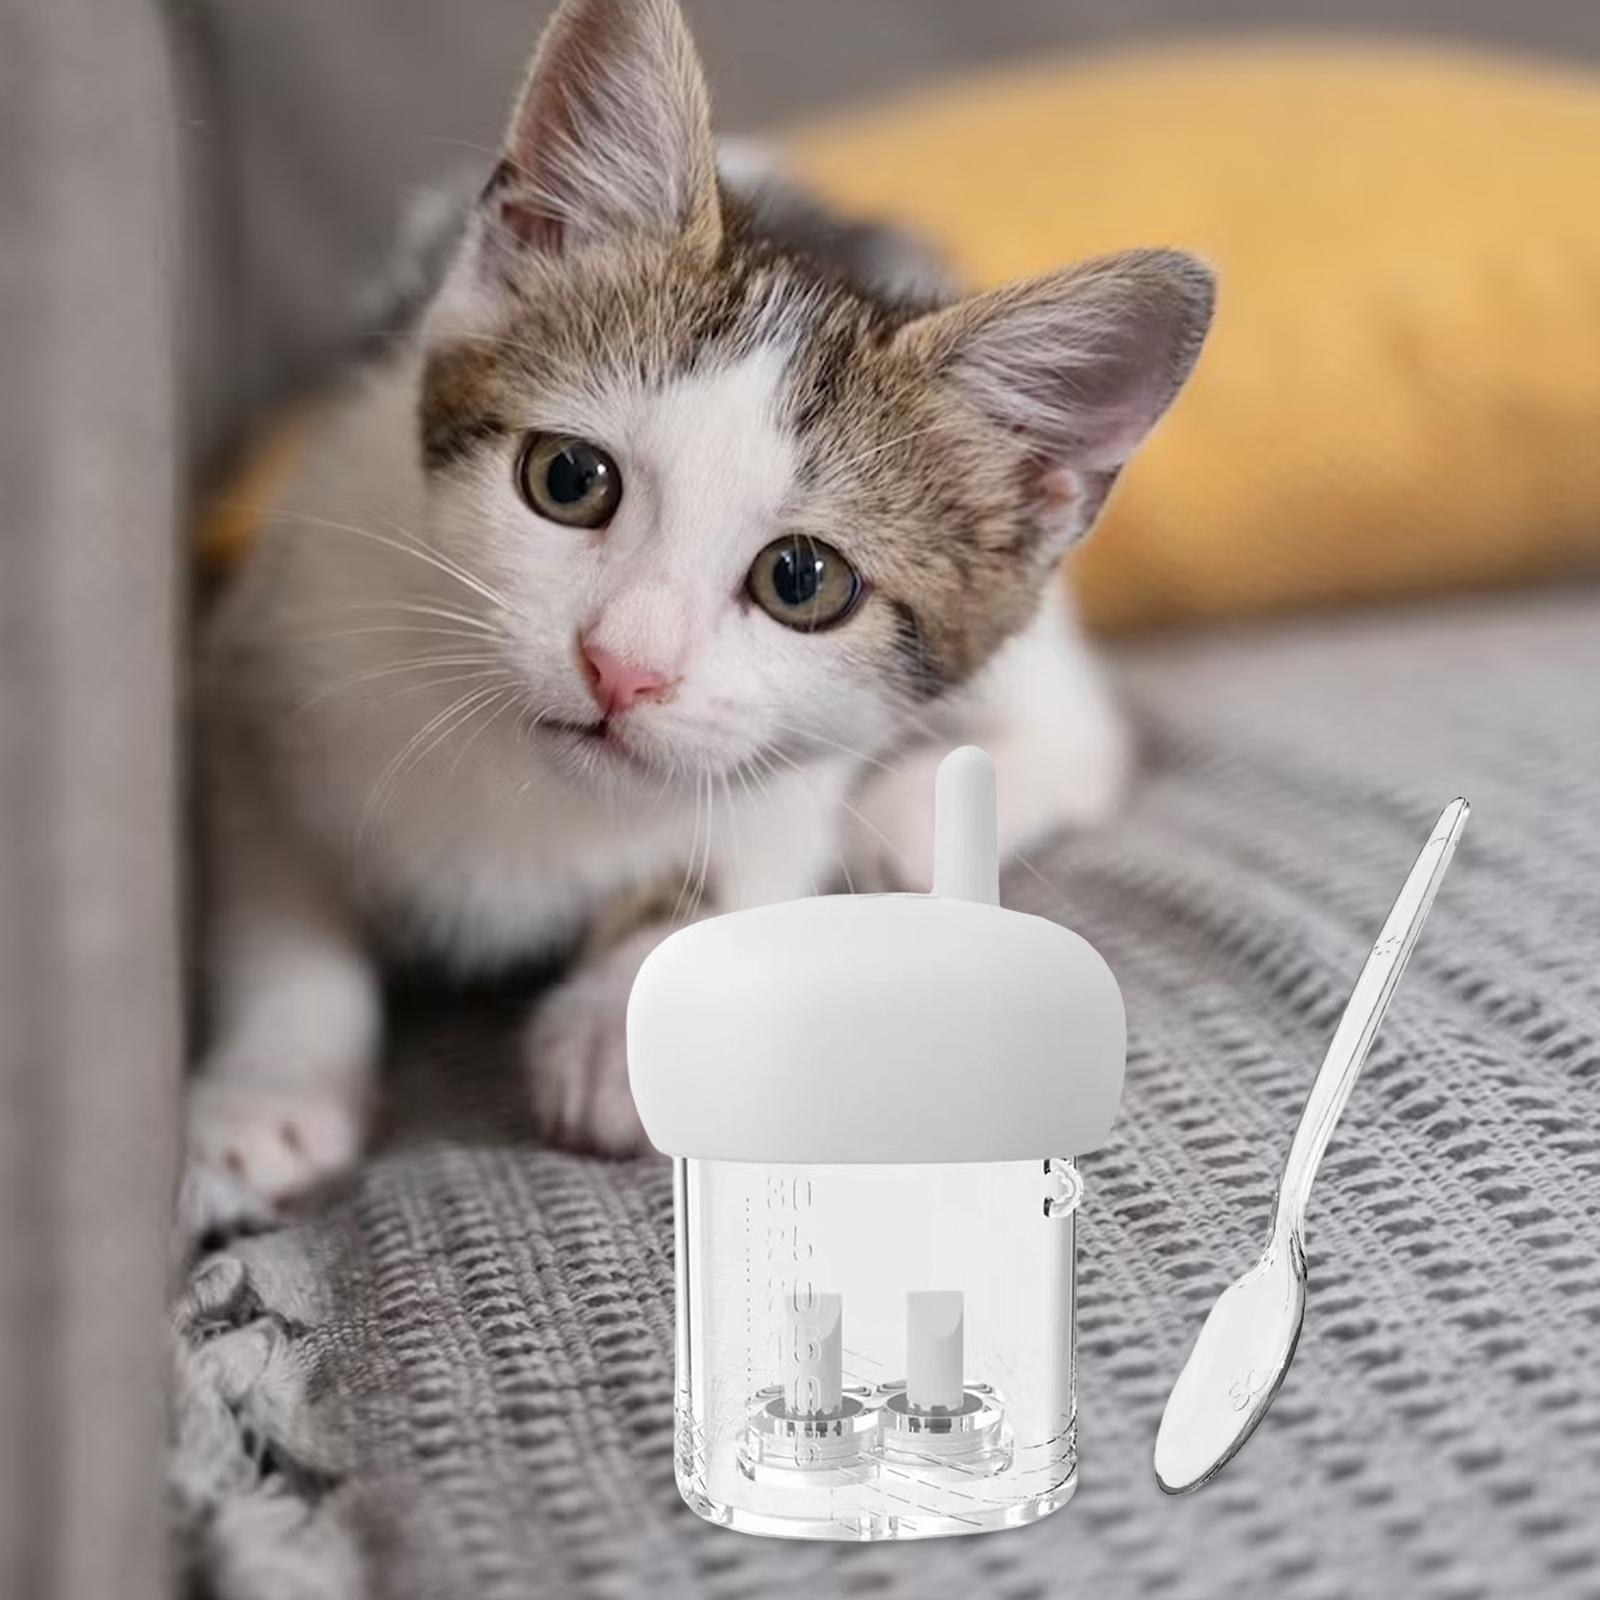 Pet  Milk Water Bottle Silicone Portable Feeding Device 30cc Pet Nursing Bottle Nursing Milk Bottle for Hamster Farm Accessory